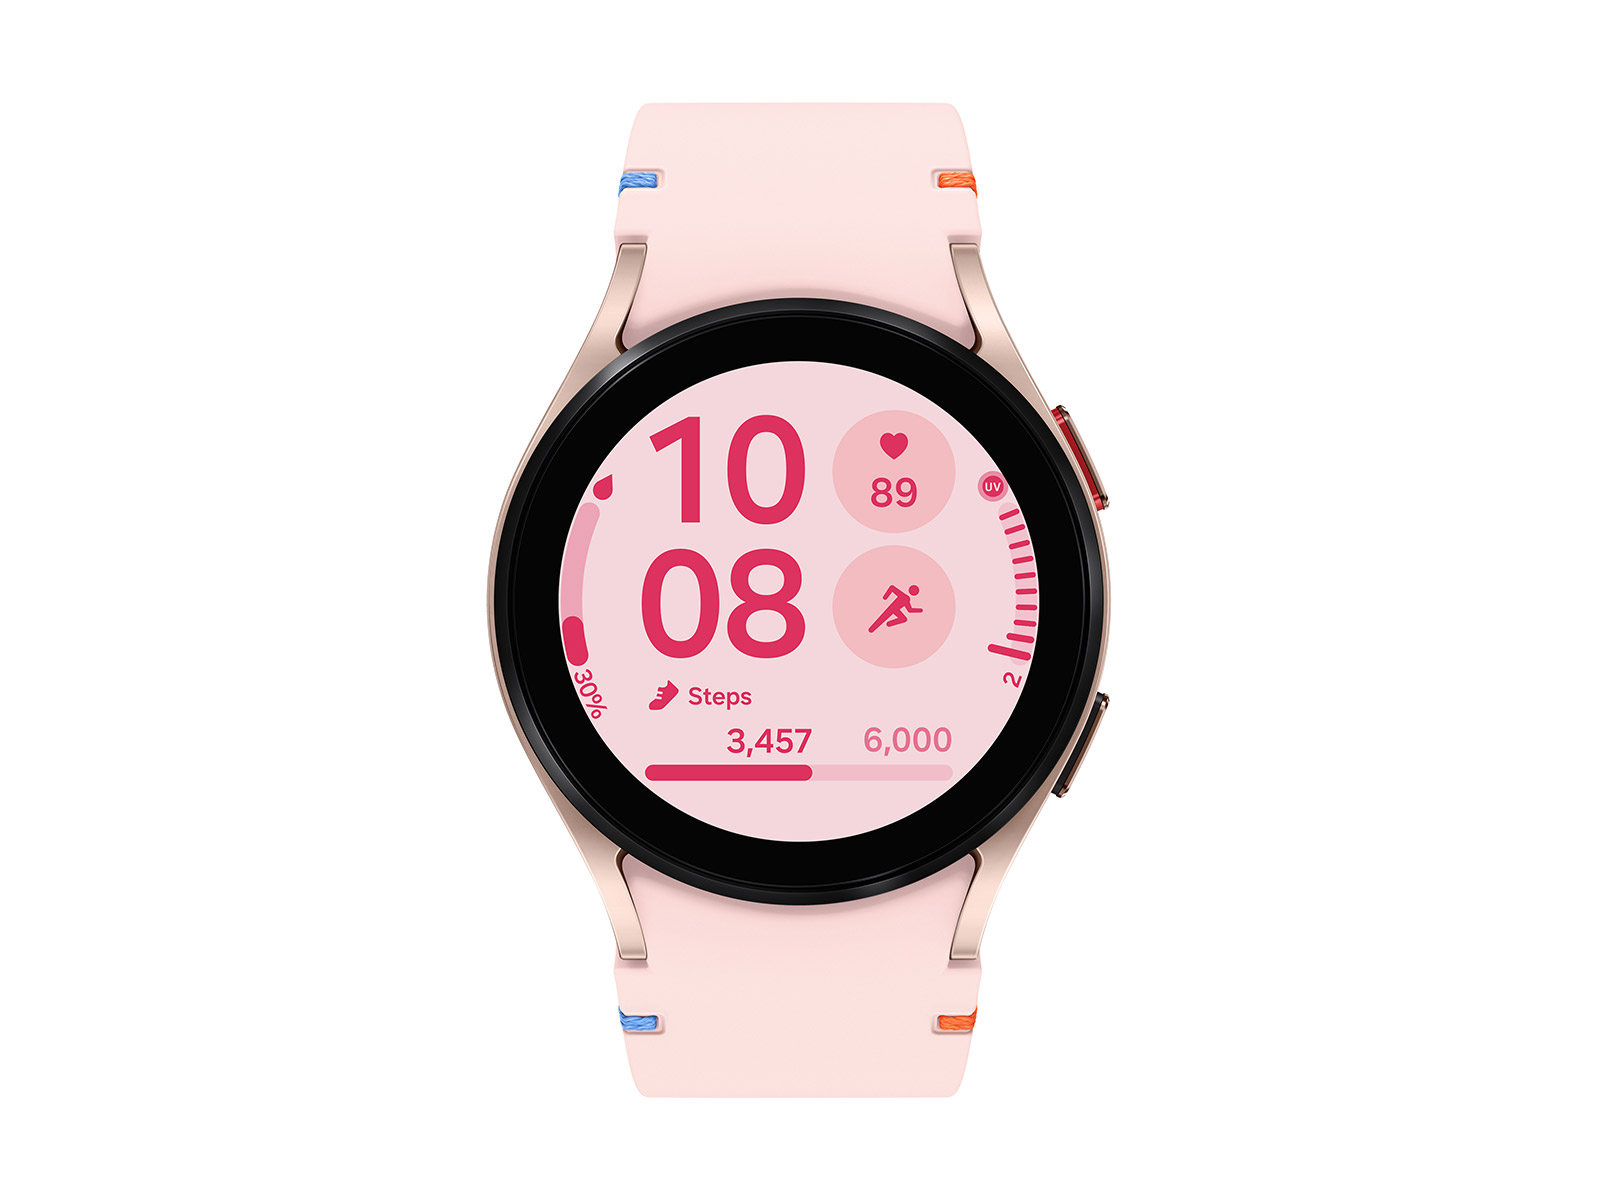 SamsungUS/samsungbusiness/mobile/wearables/smartwatches/gw-fe-pink-gold/SM-R861_002_Front2_Pink_Gold_1600x1200.jpg